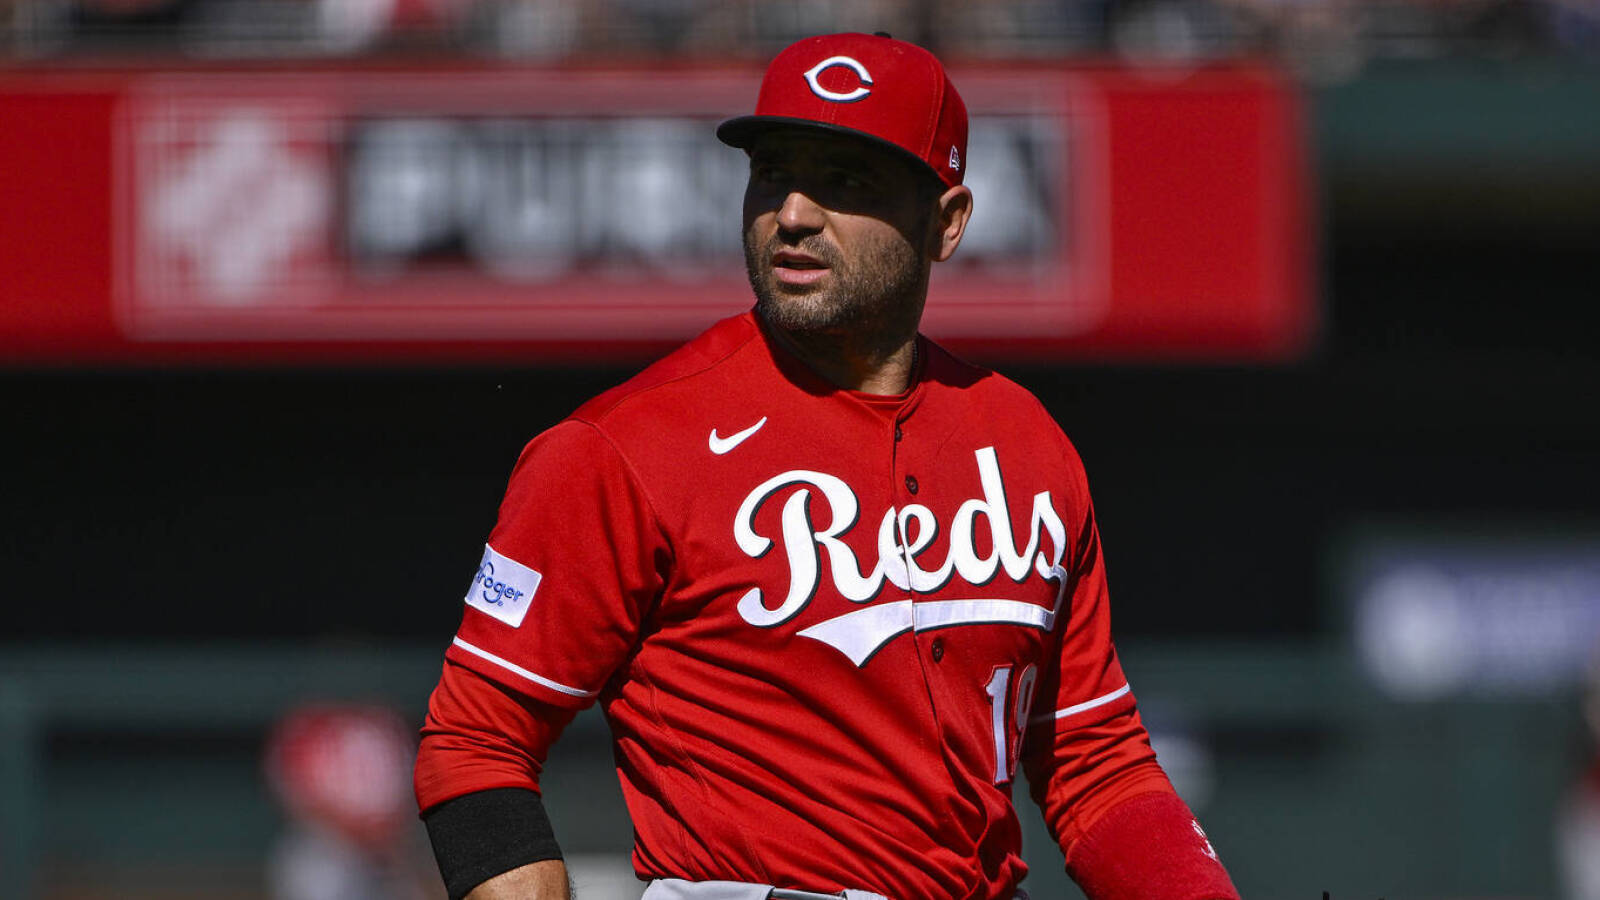 Nick Krall gets candid on Joey Votto's future with Reds